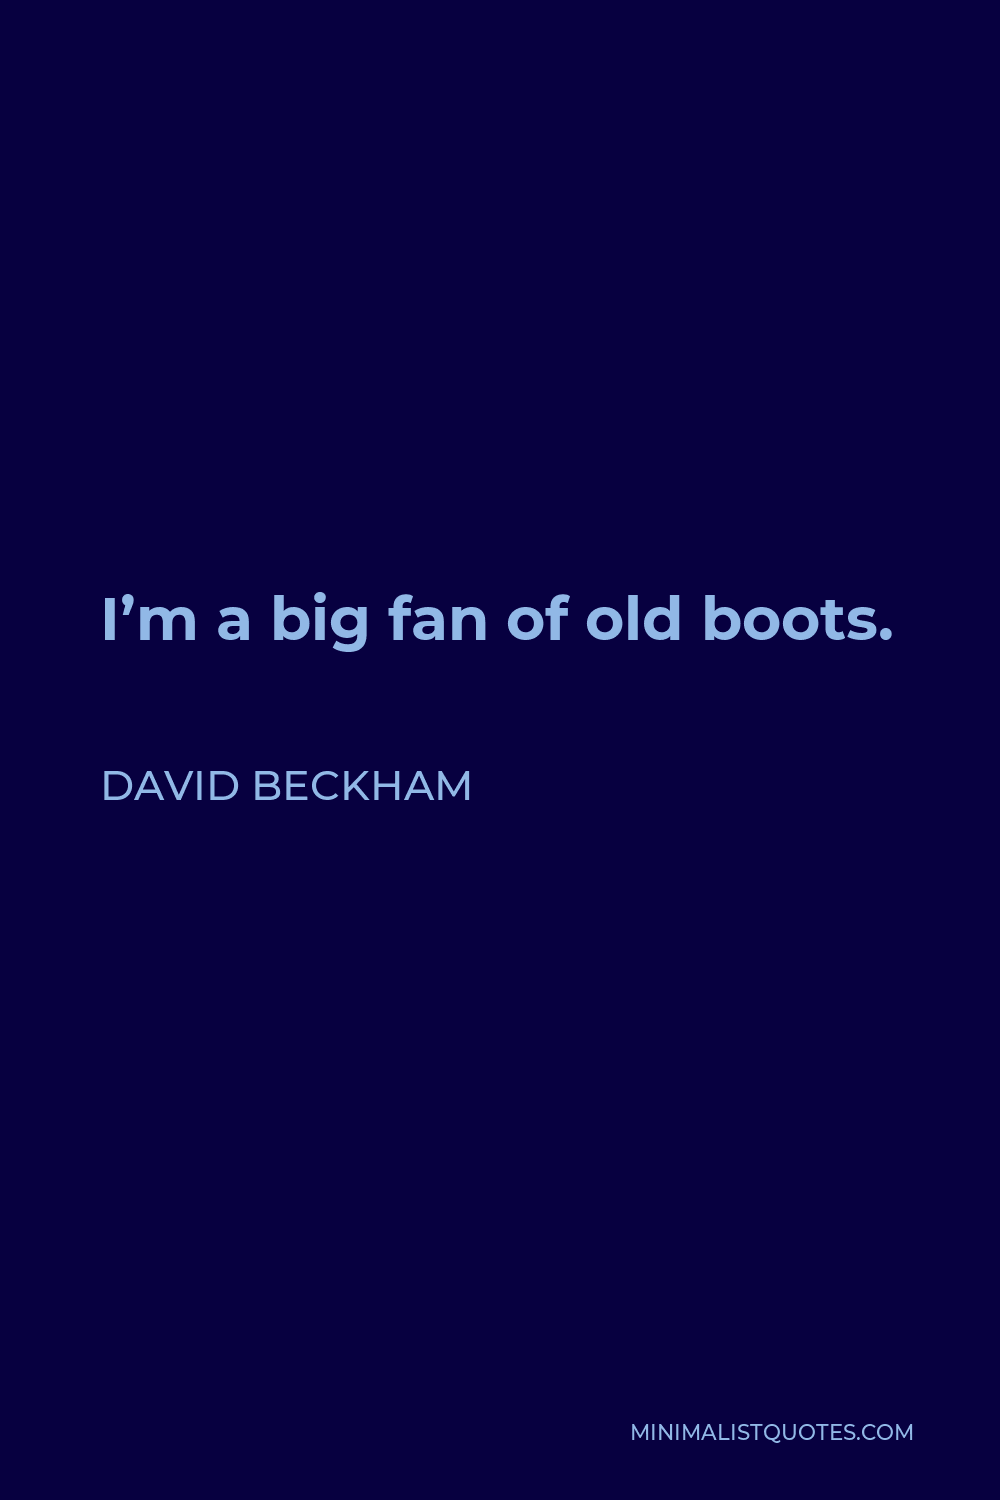 David Beckham Quote - I’m a big fan of old boots.